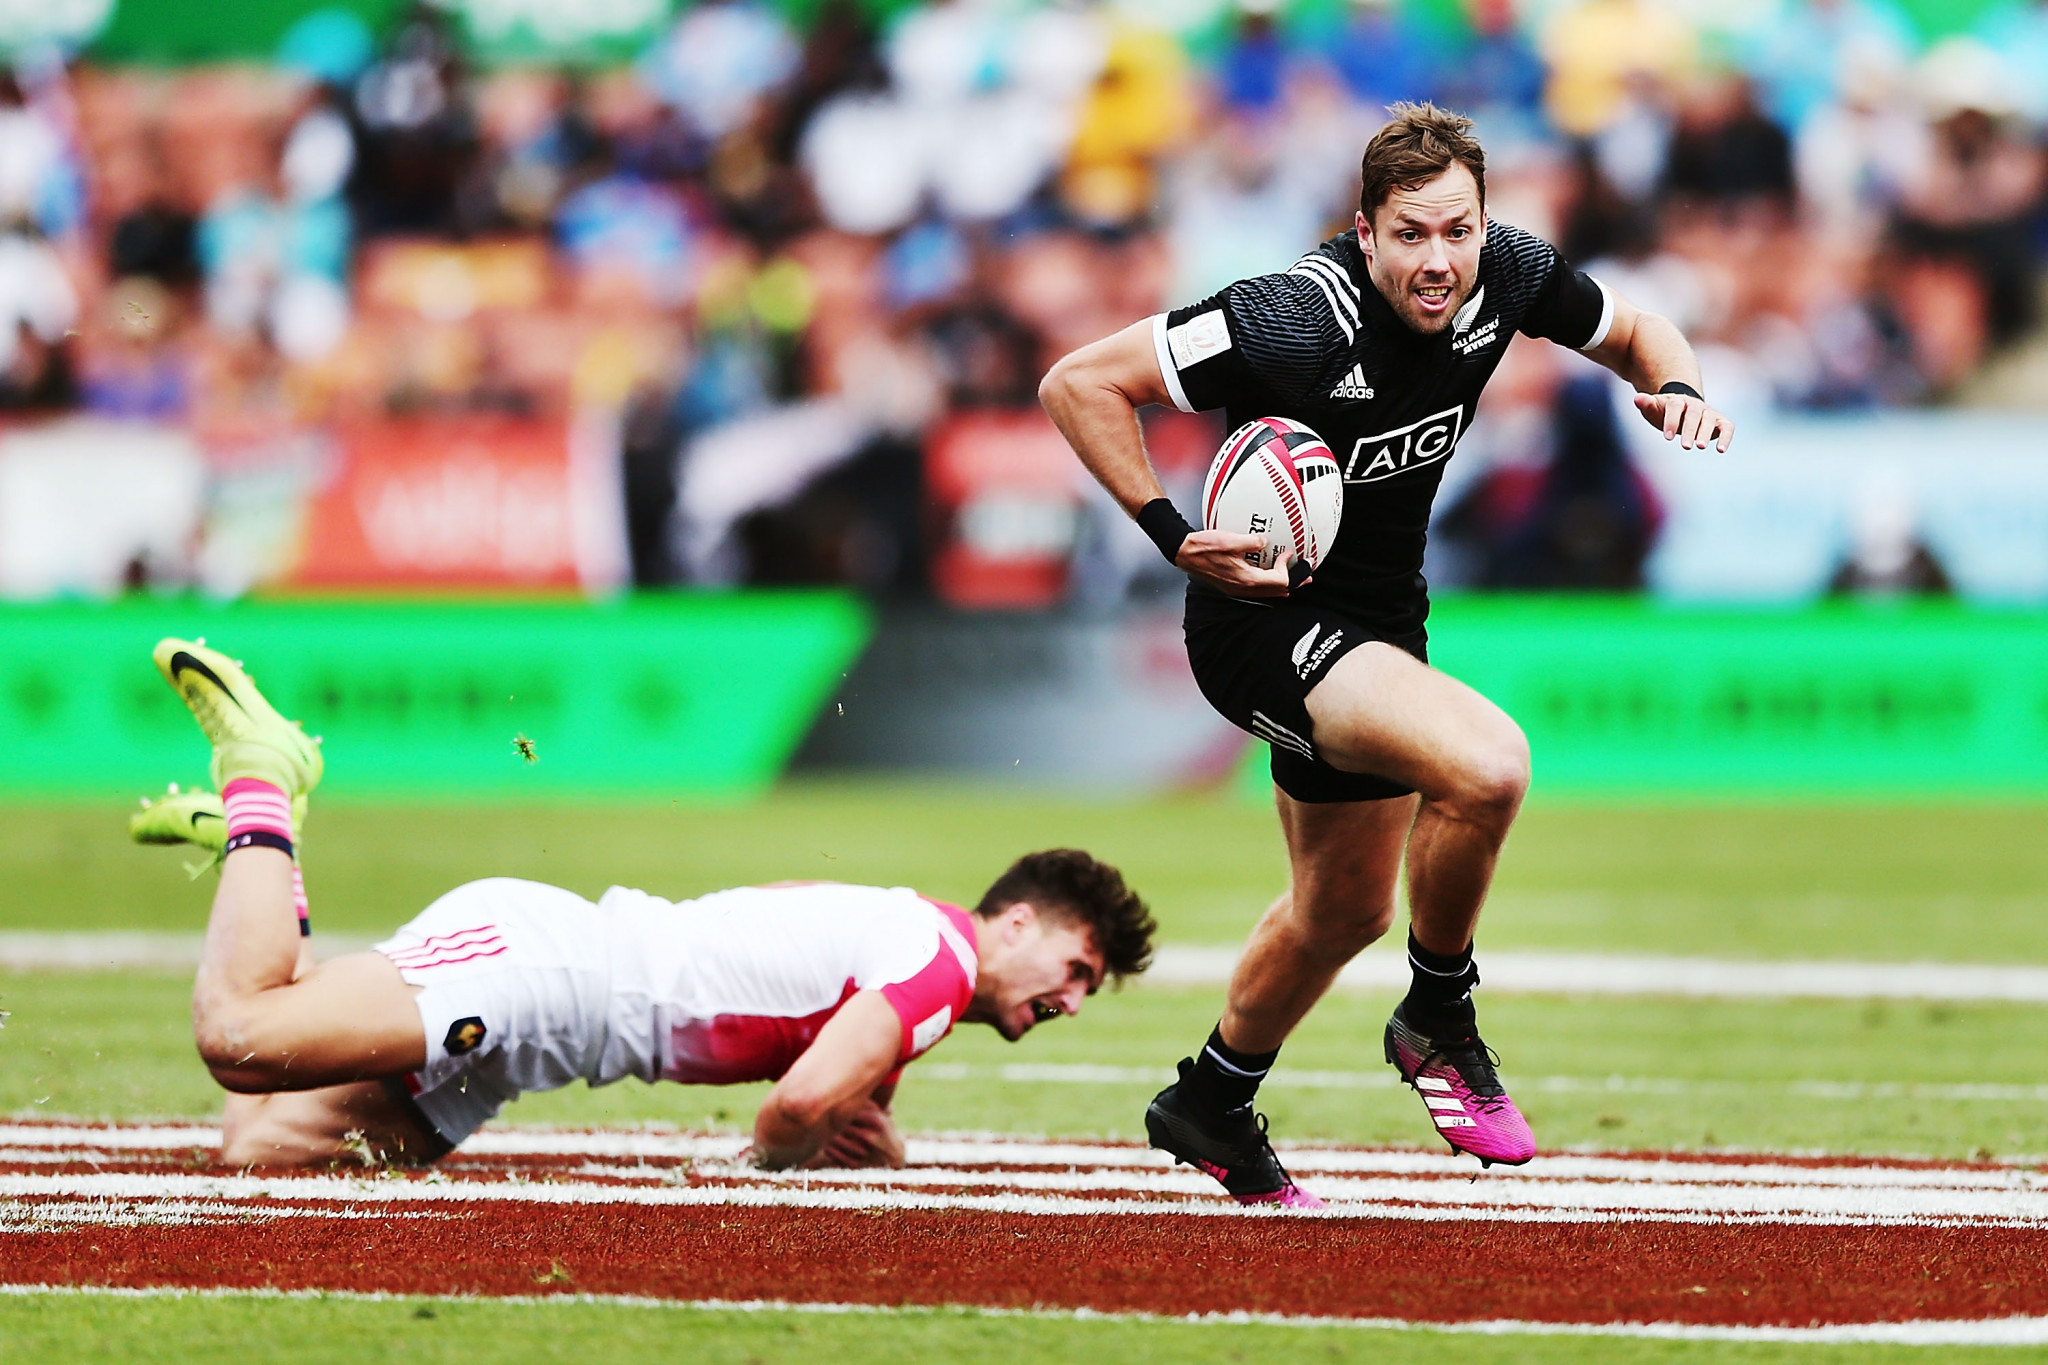 New Zealand's captain Tim Mikkelson said he is looking forward to playing in front of a home crowd at the World Rugby Sevens Series event at the FMG Stadium Waikato in Hamilton ©Getty Images